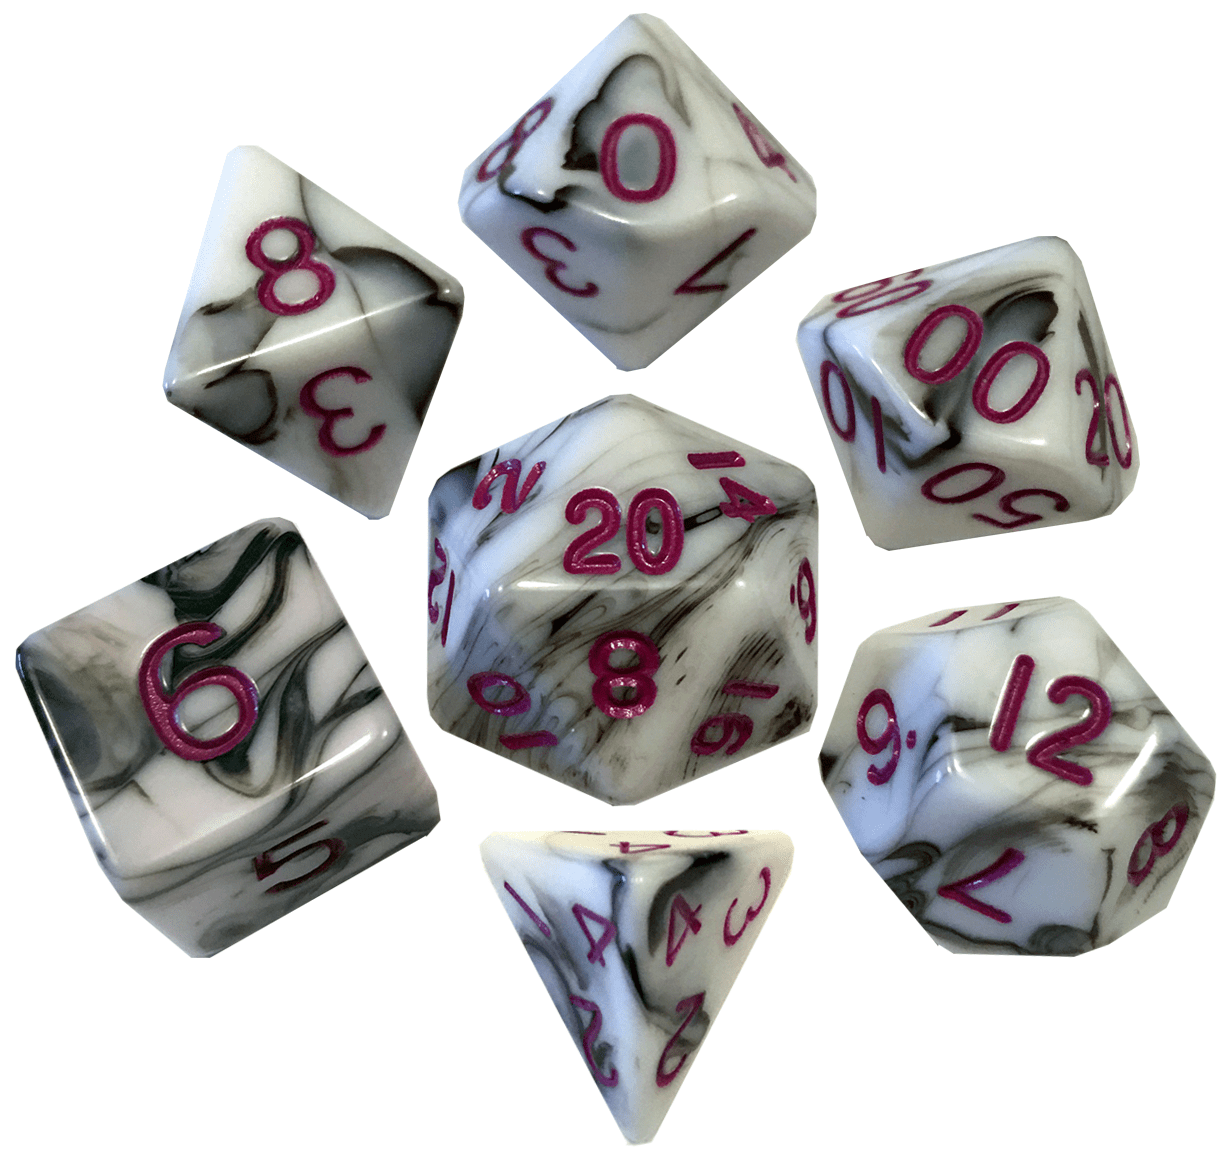 16mm Dice Set Marble with Purple Numbers (1037)